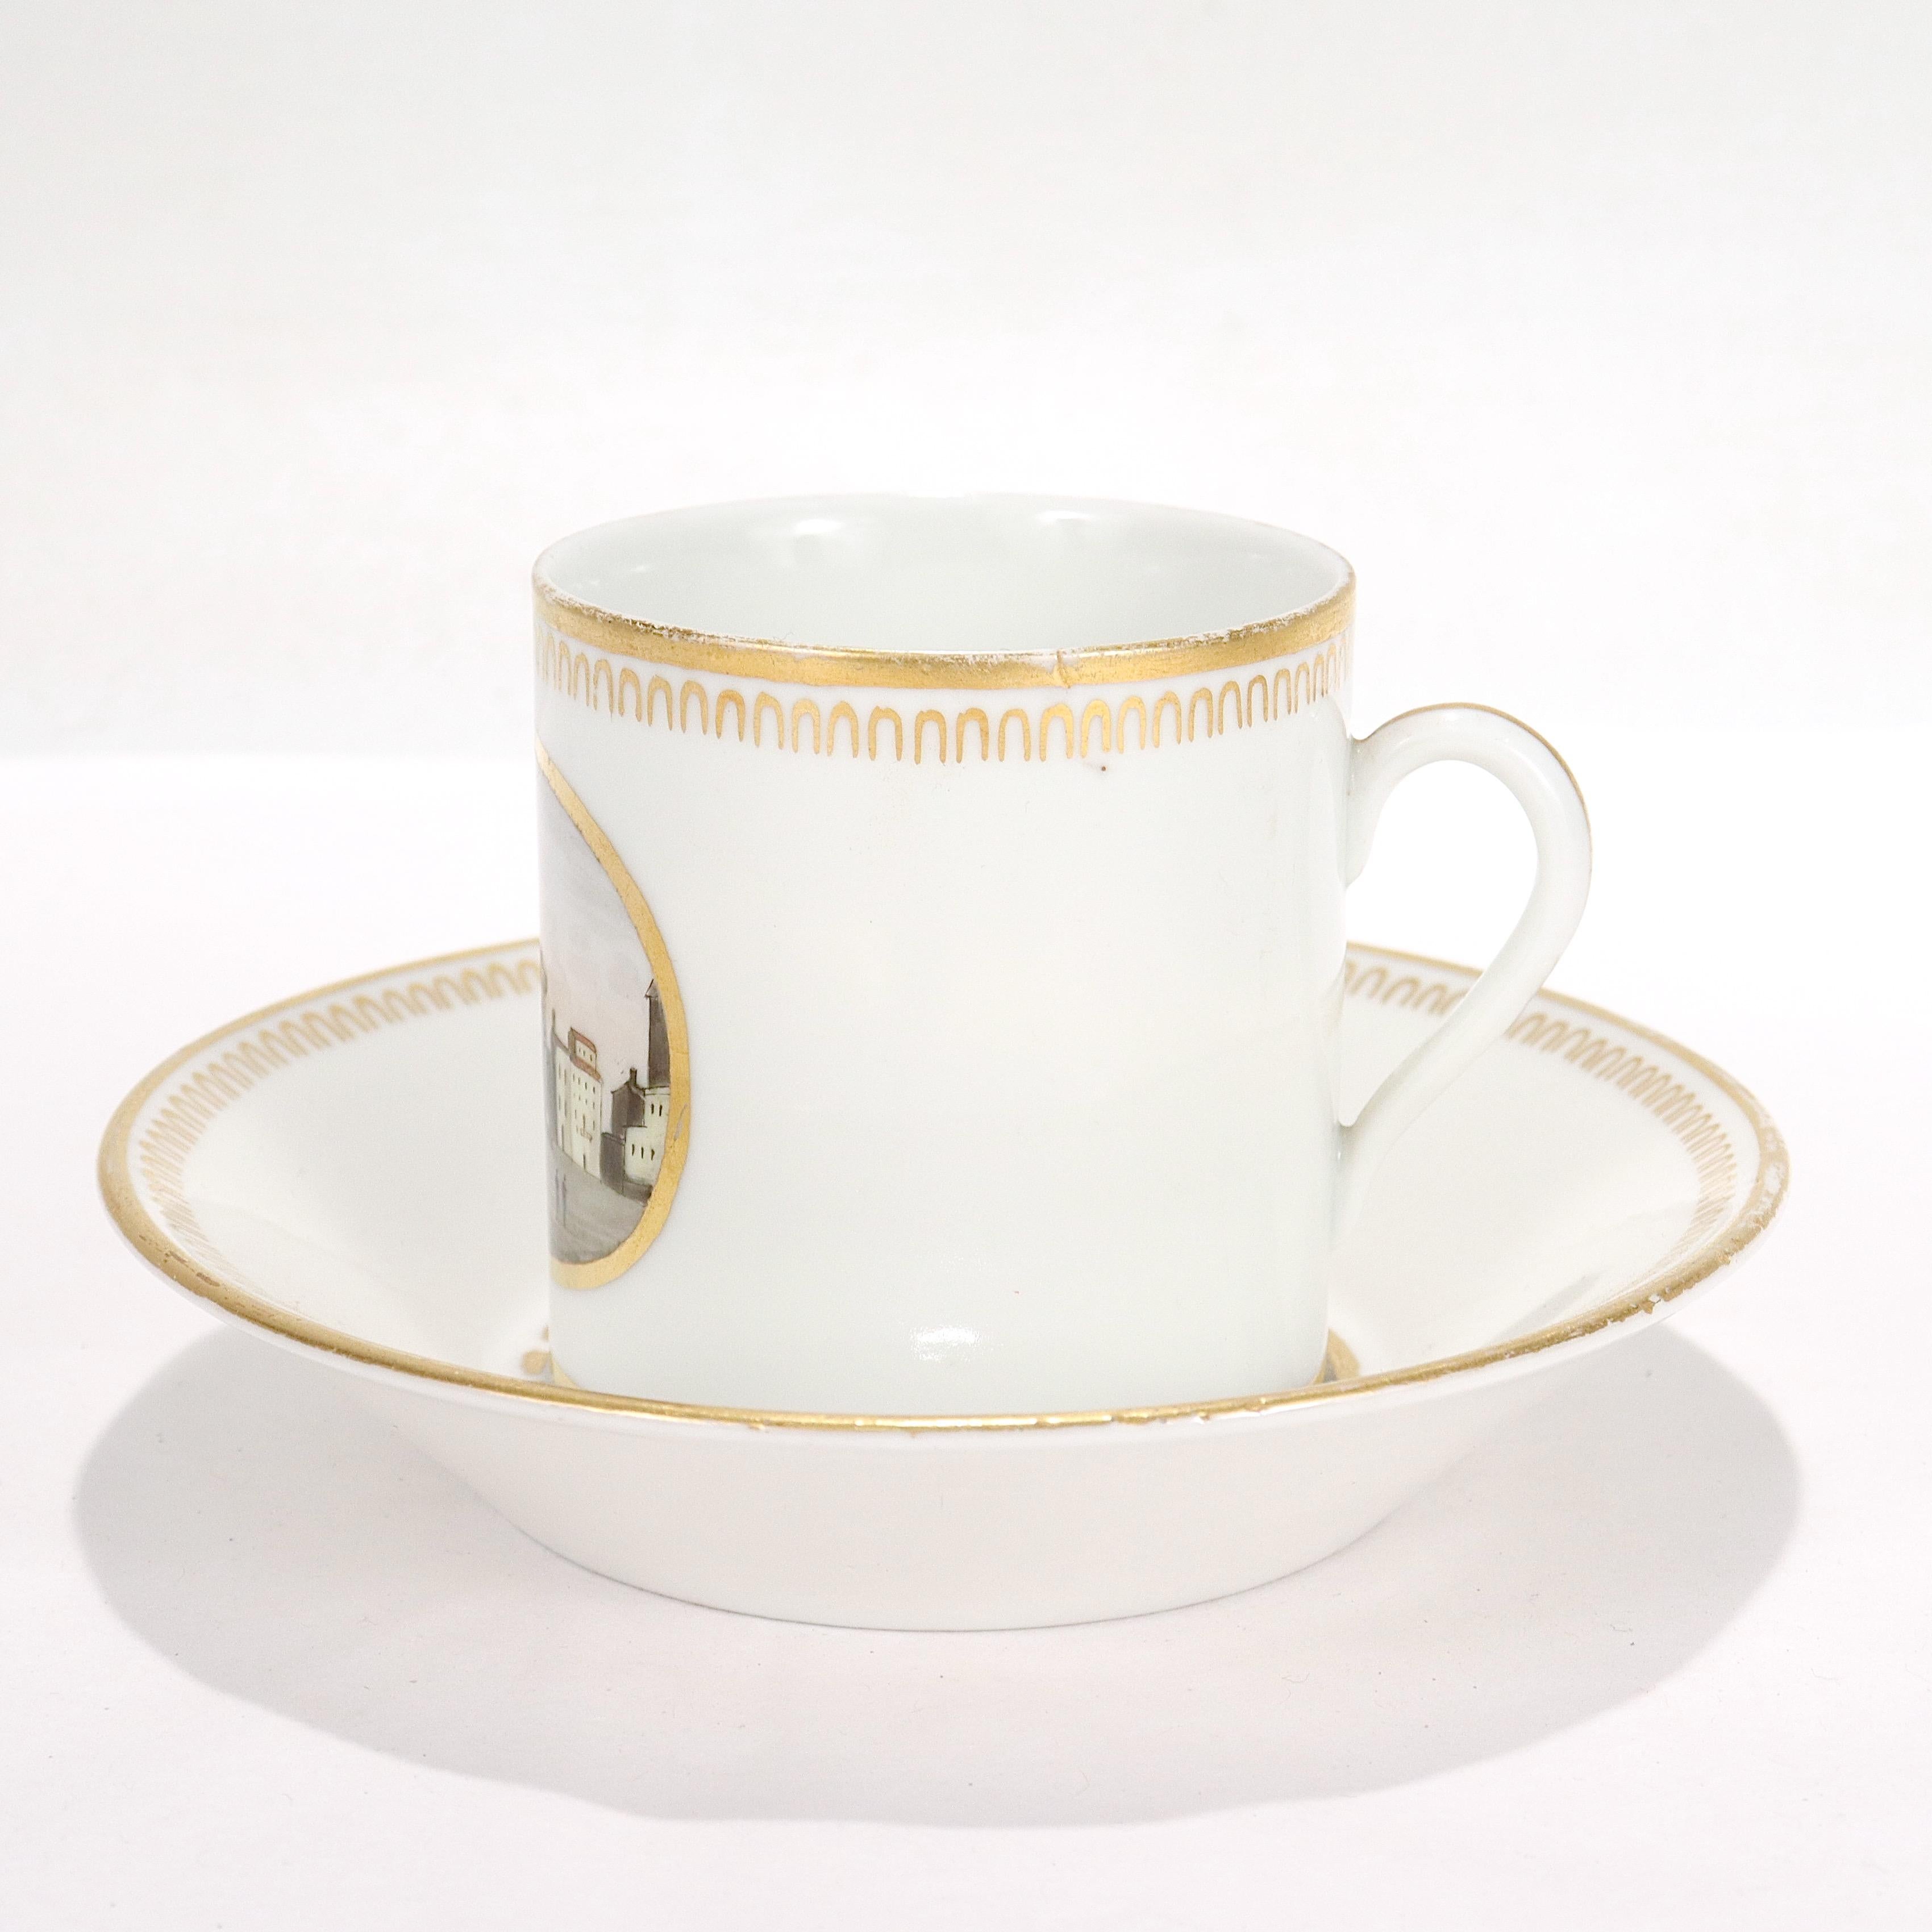 Offered here for your consideration is, A fine antique topographical porcelain cup & saucer.

By Doccia porcelain manufactory circa 1820.

With painted enamel topographical scenes: the cup depicting Florence's 